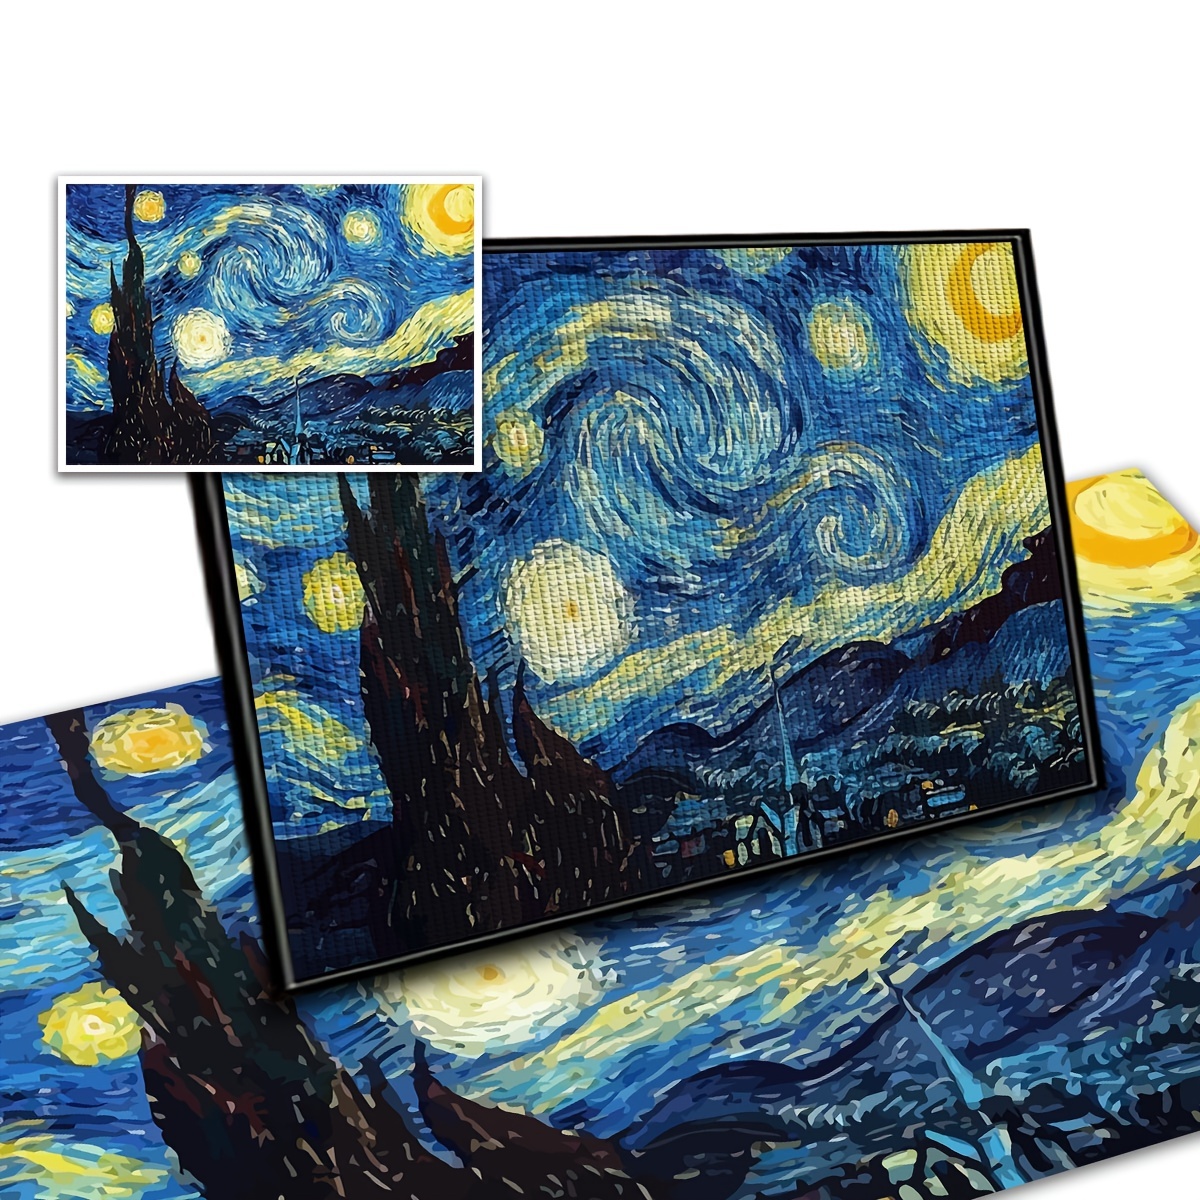 Coraline and Cat Vincent Van Gogh Starry Night Christmas Home 5D Full Drill  Diamond Painting Kit, DIY Diamond Rhinestone Painting Kits for Adults and